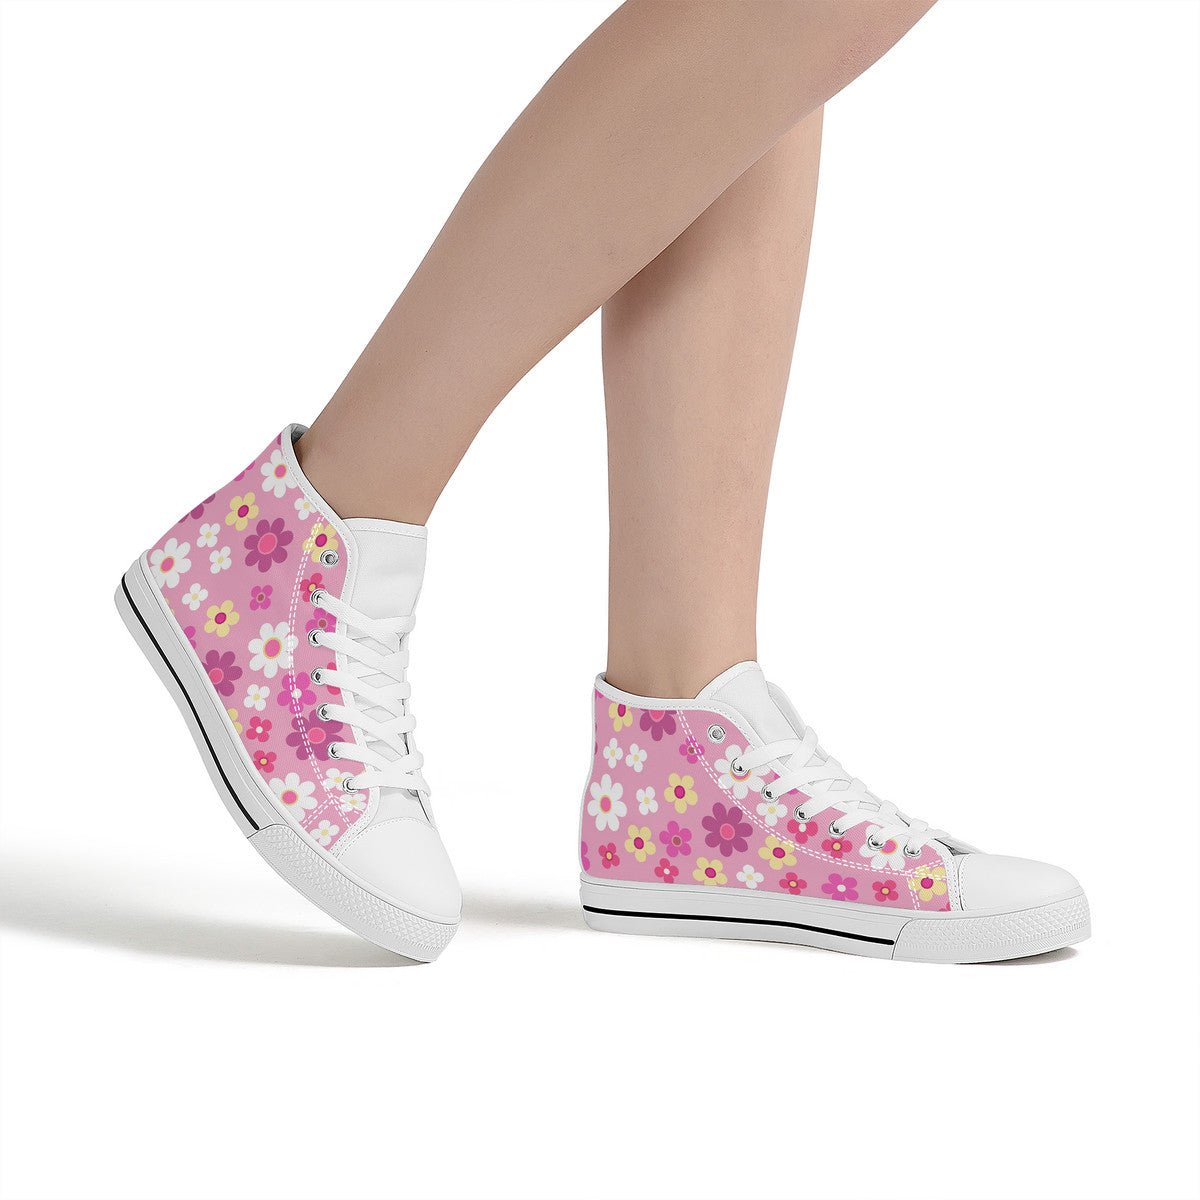 Kasumi Mist Pink High-Top Shoes